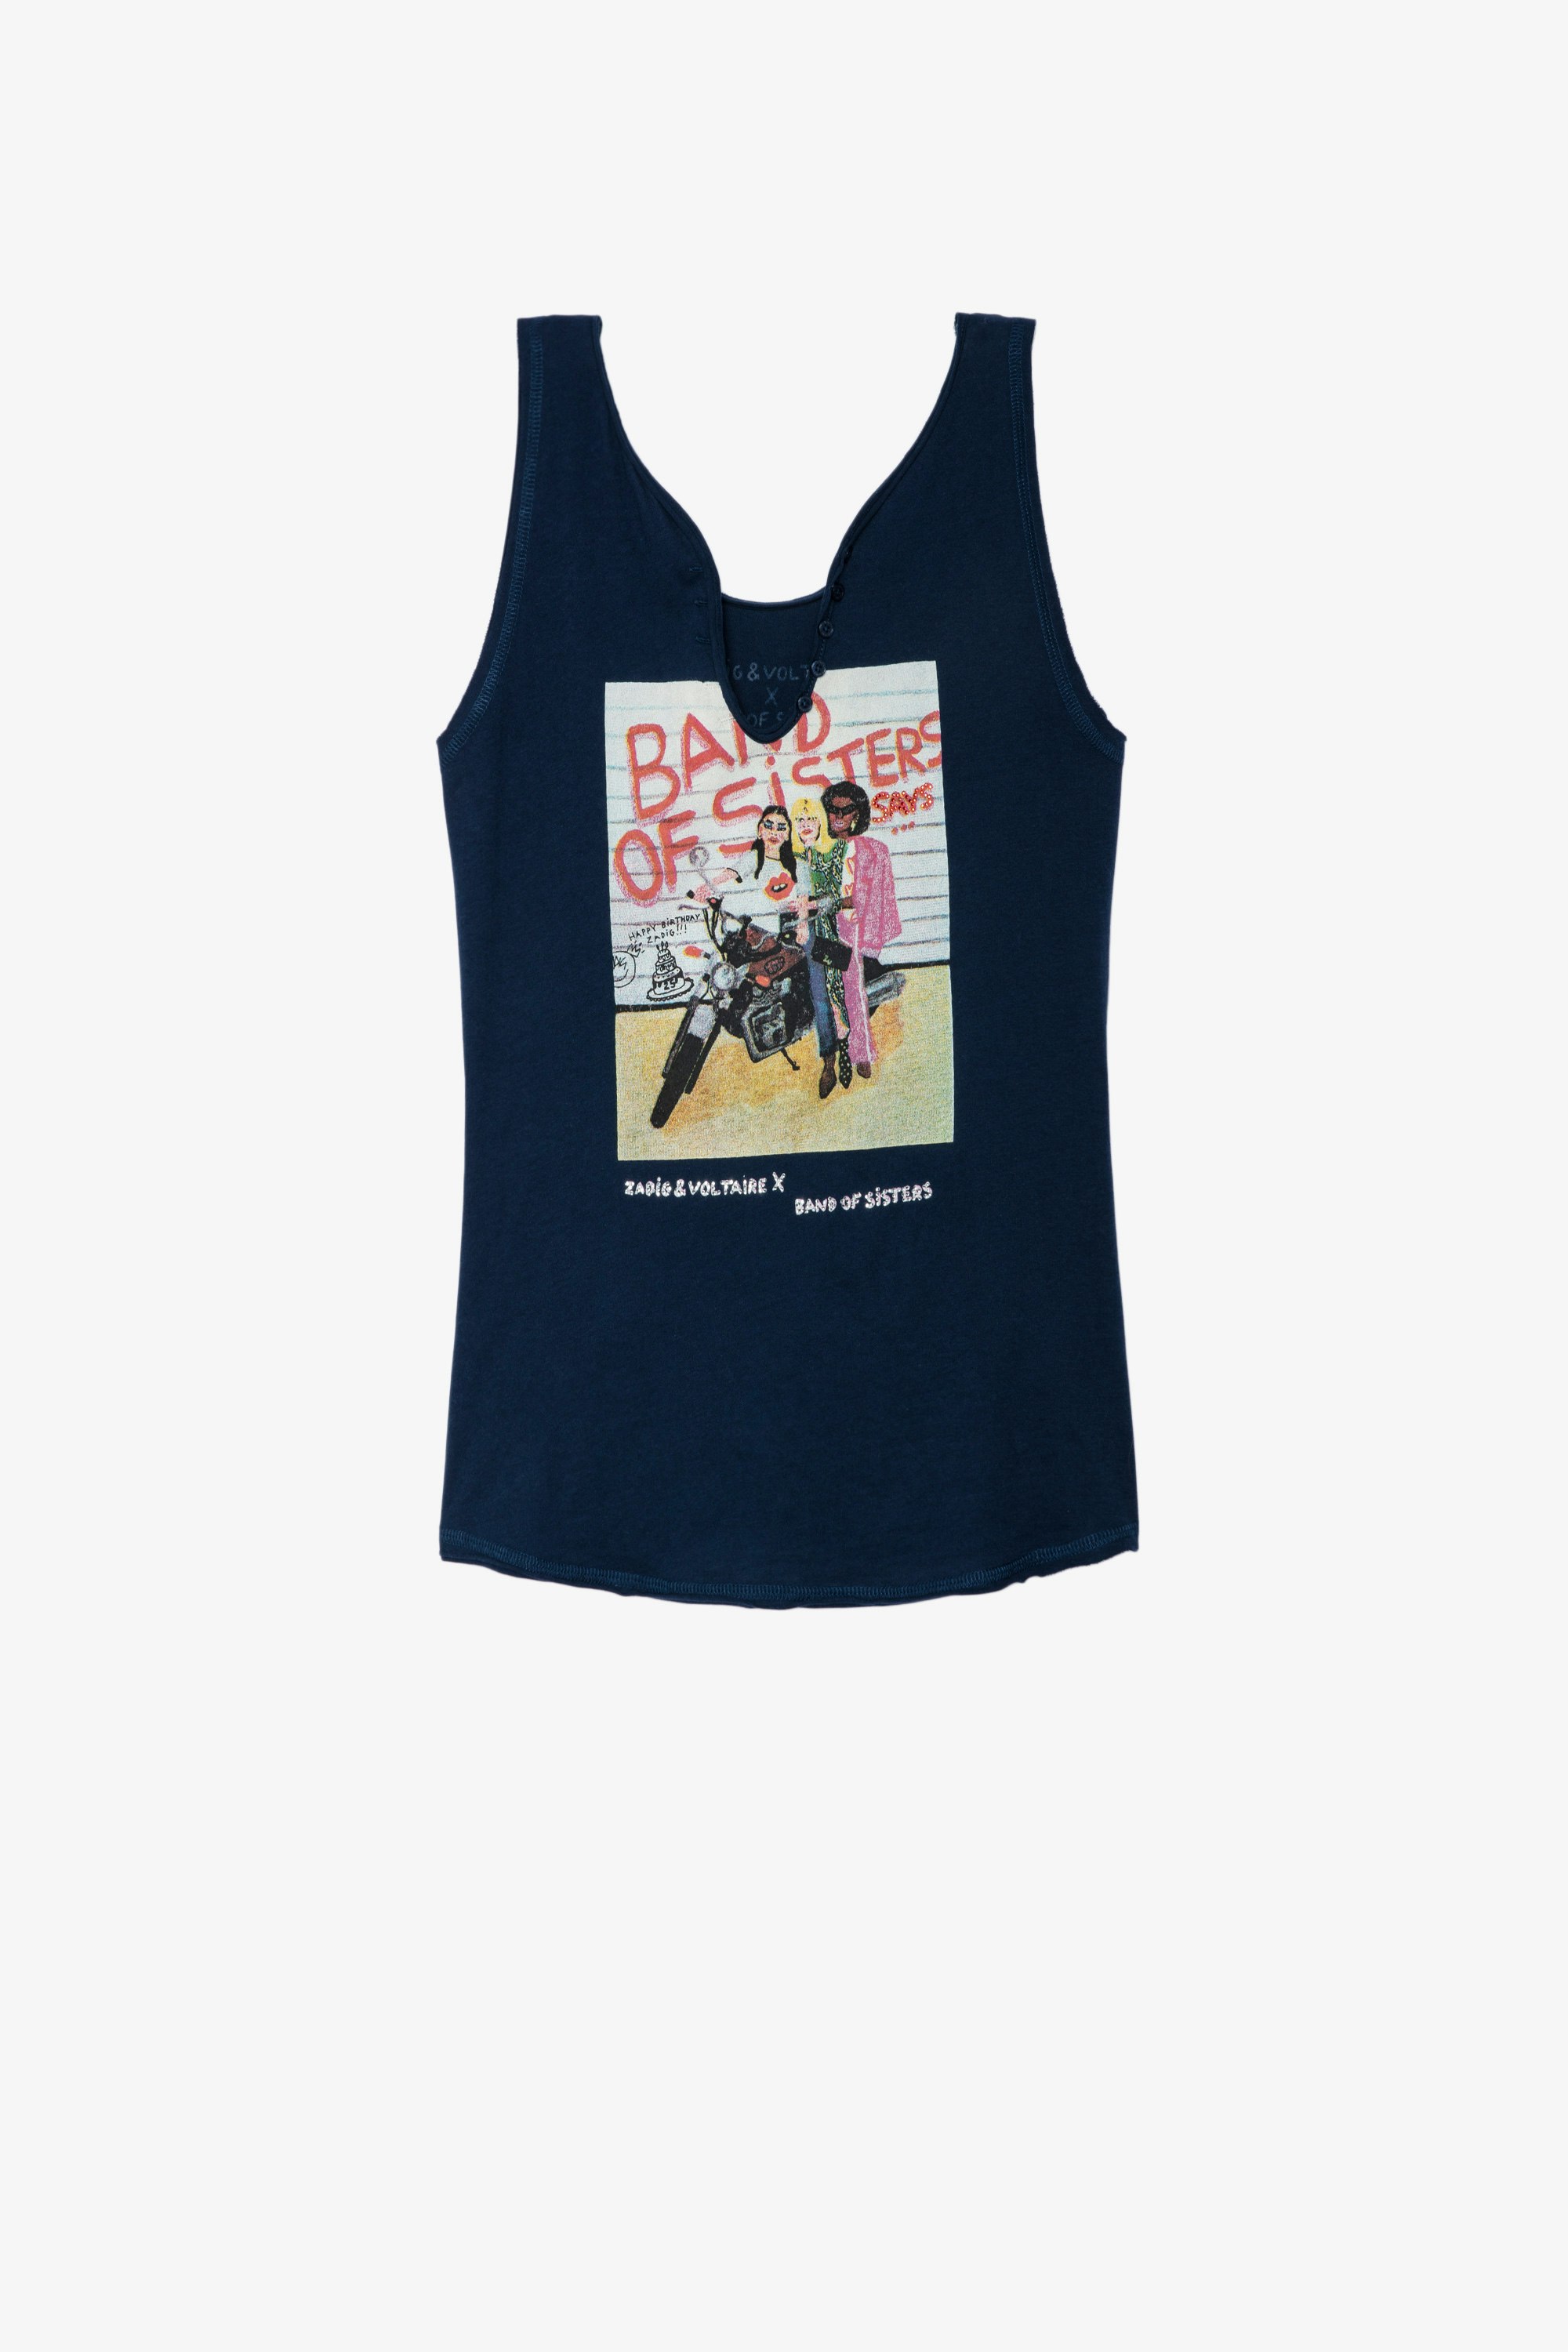 Band of Sisters Dany Tank Top Women’s navy blue cotton tank top with Band of Sisters print